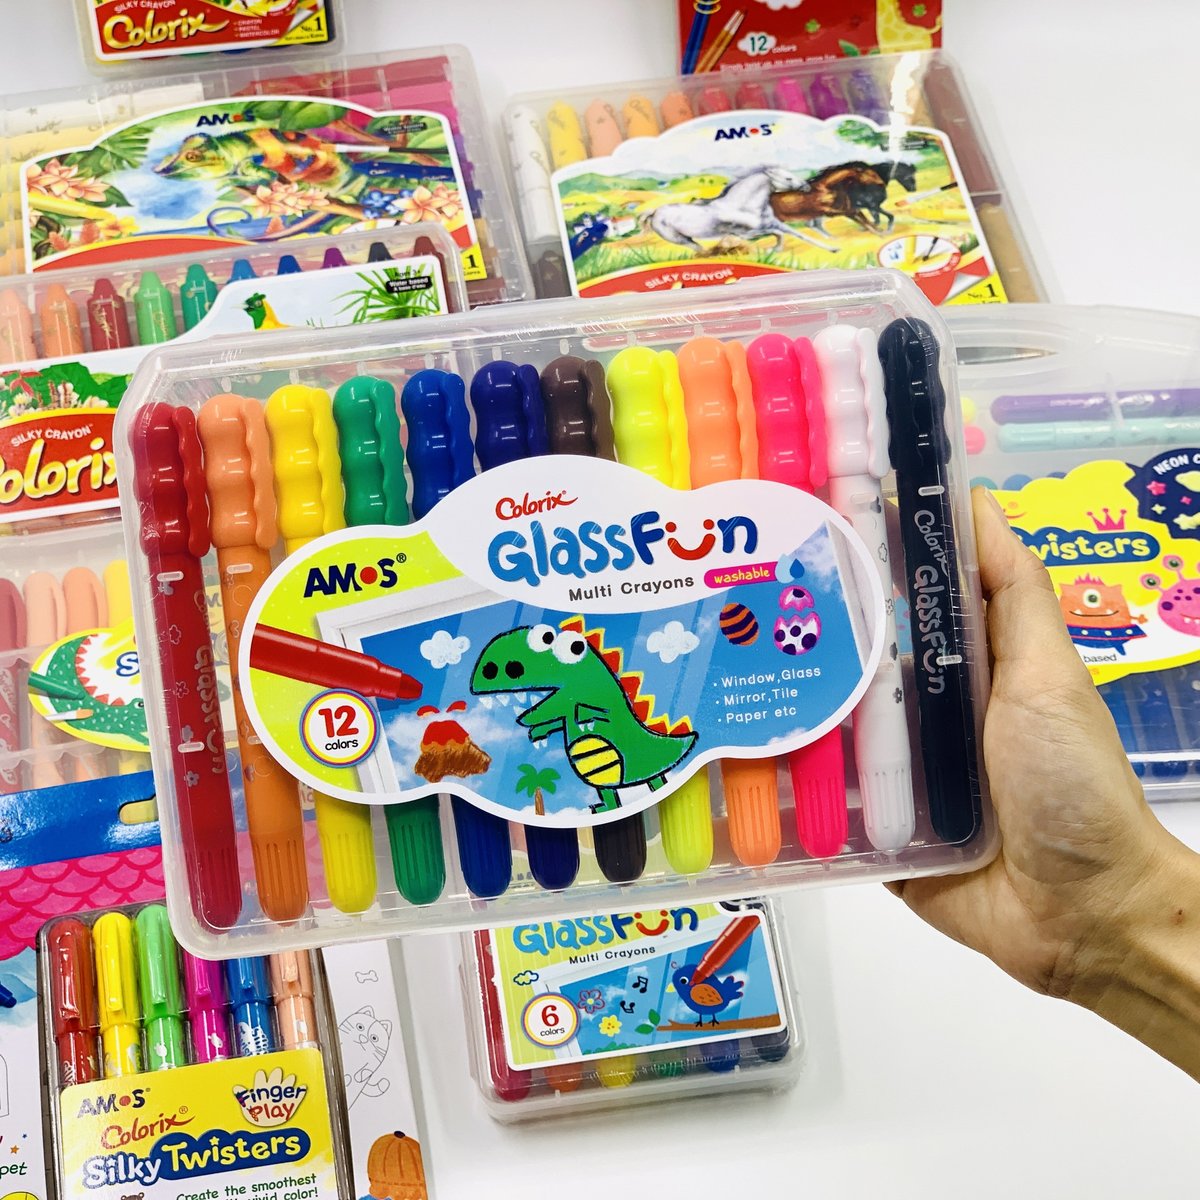 AMOS colorix Premium Silky Crayons Set ,Safe Non-toxic Washable for  Kindergarten Children 6/12/24/36 Colors Rotatable